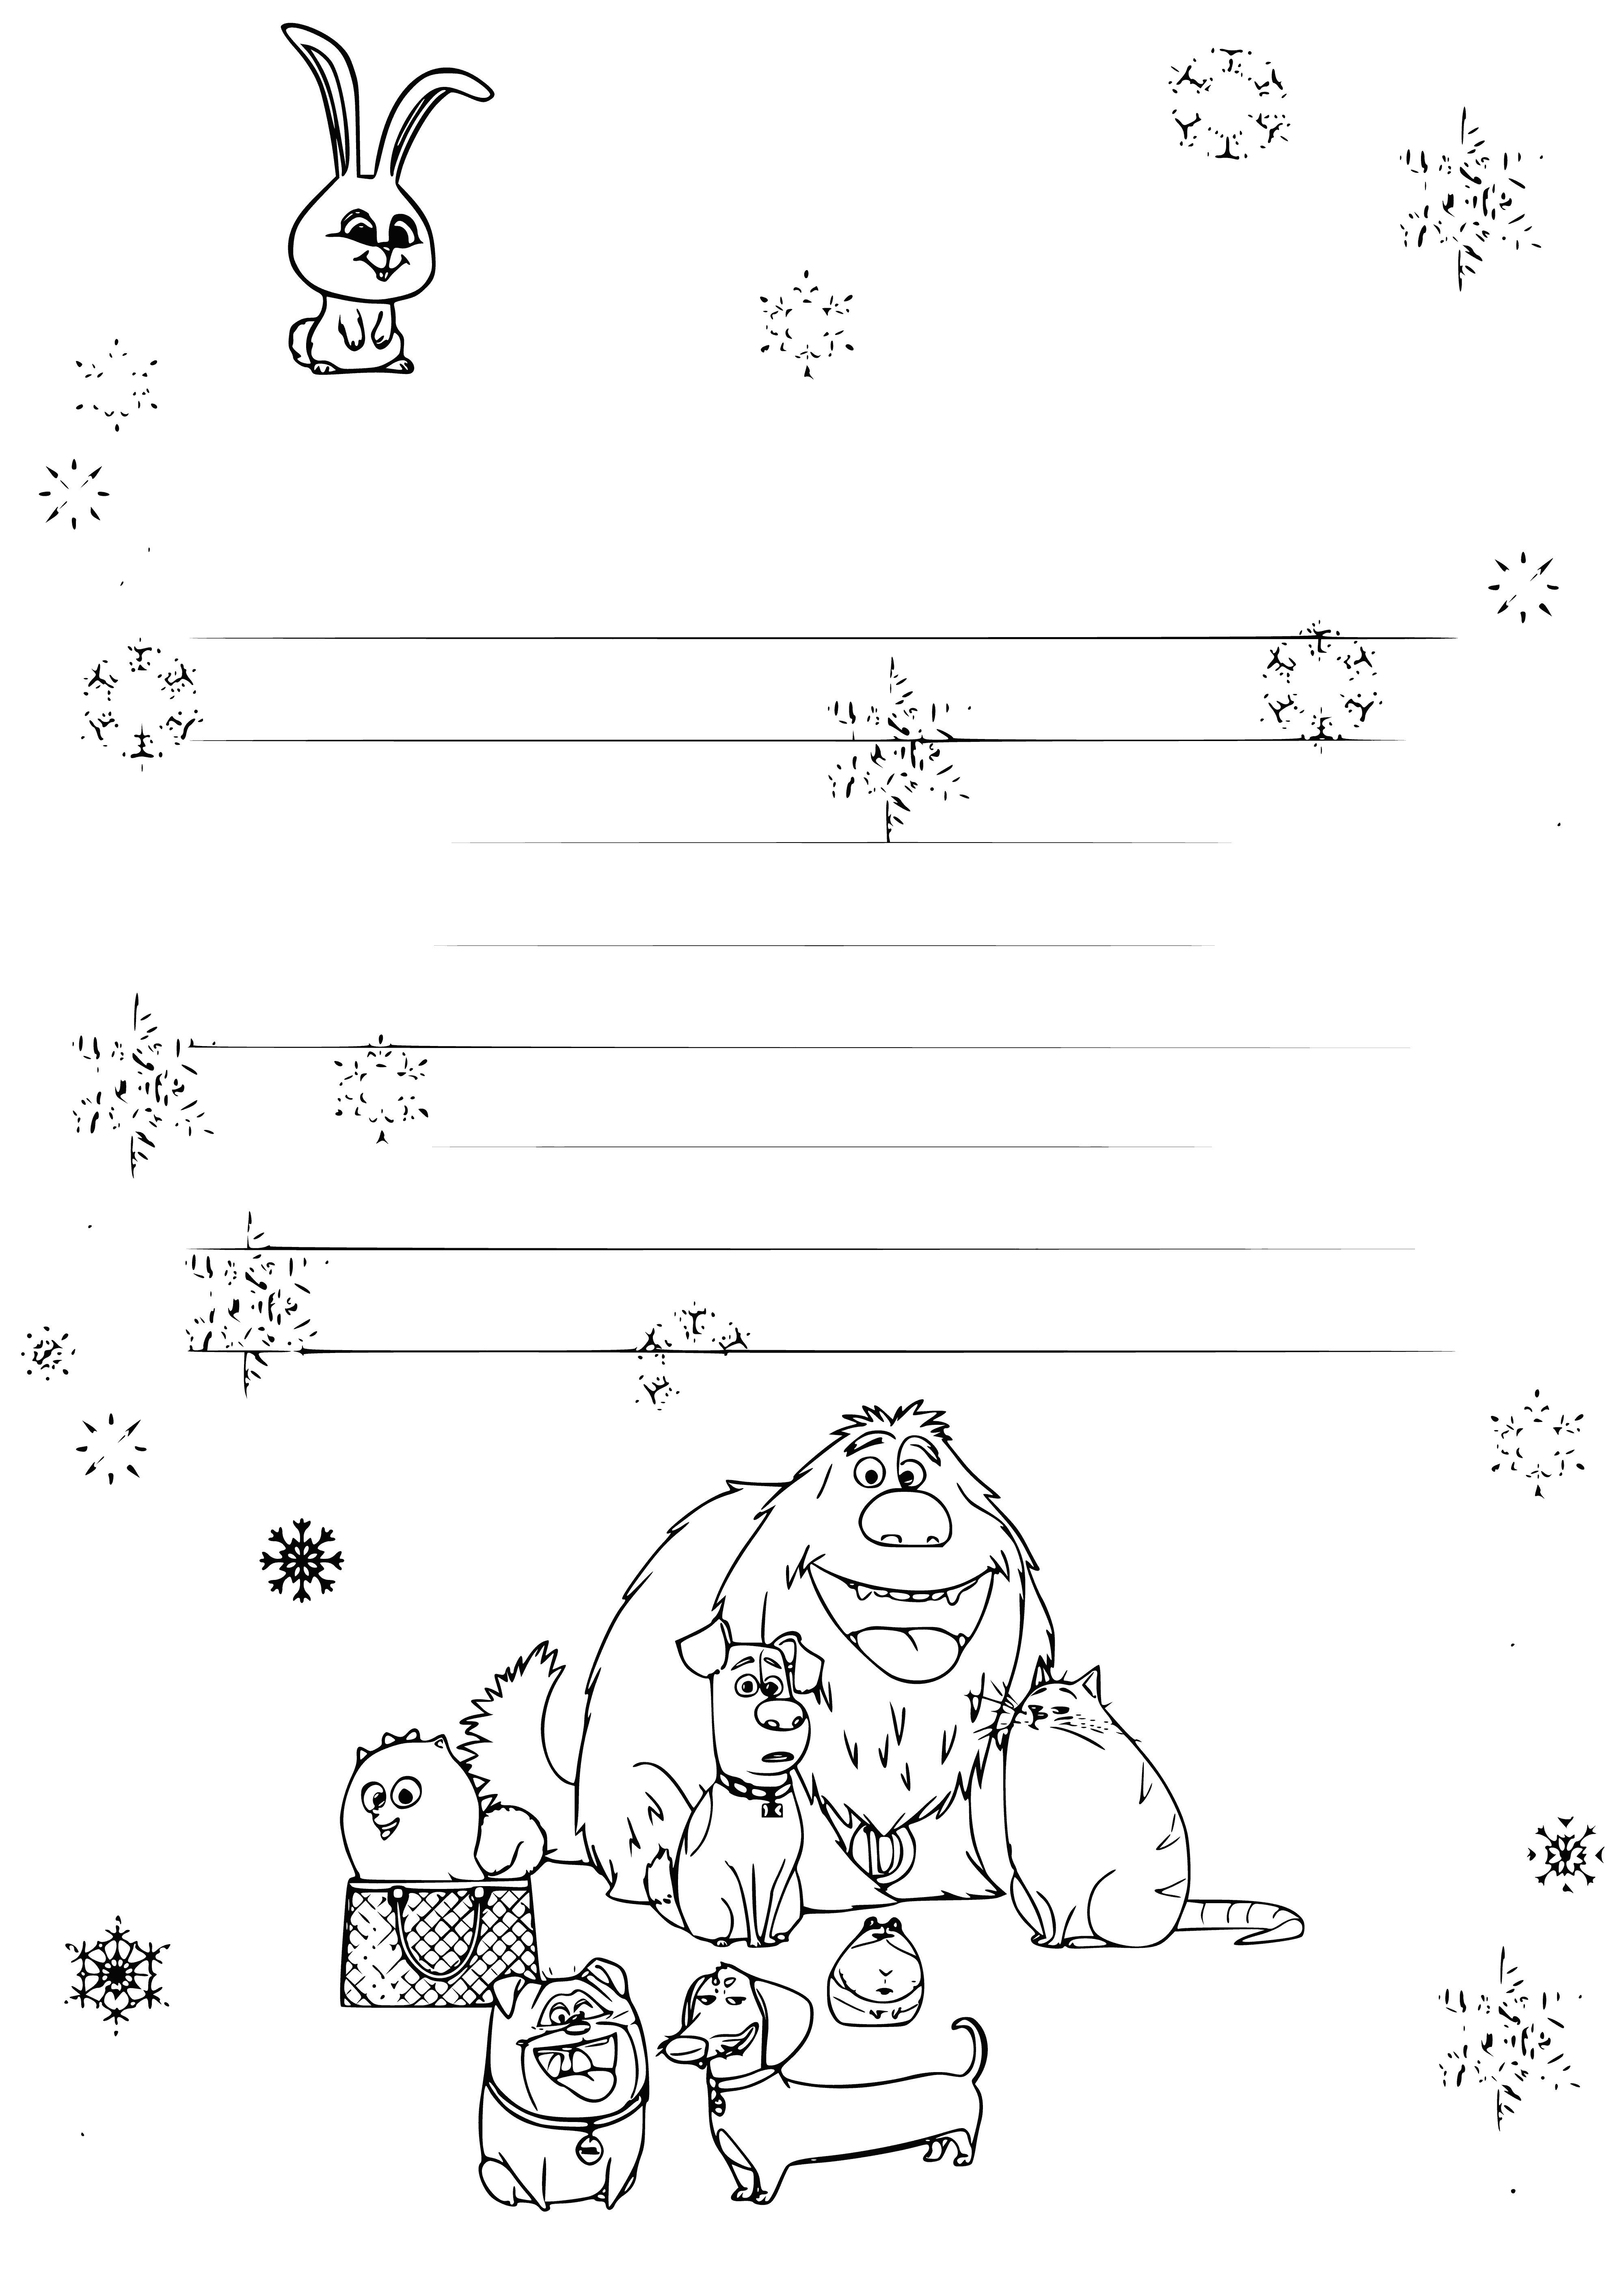 coloring page: A child writes a letter to Santa asking for a bike and a puppy & expresses how they've been good & excited for Christmas. They wish Santa a safe journey.